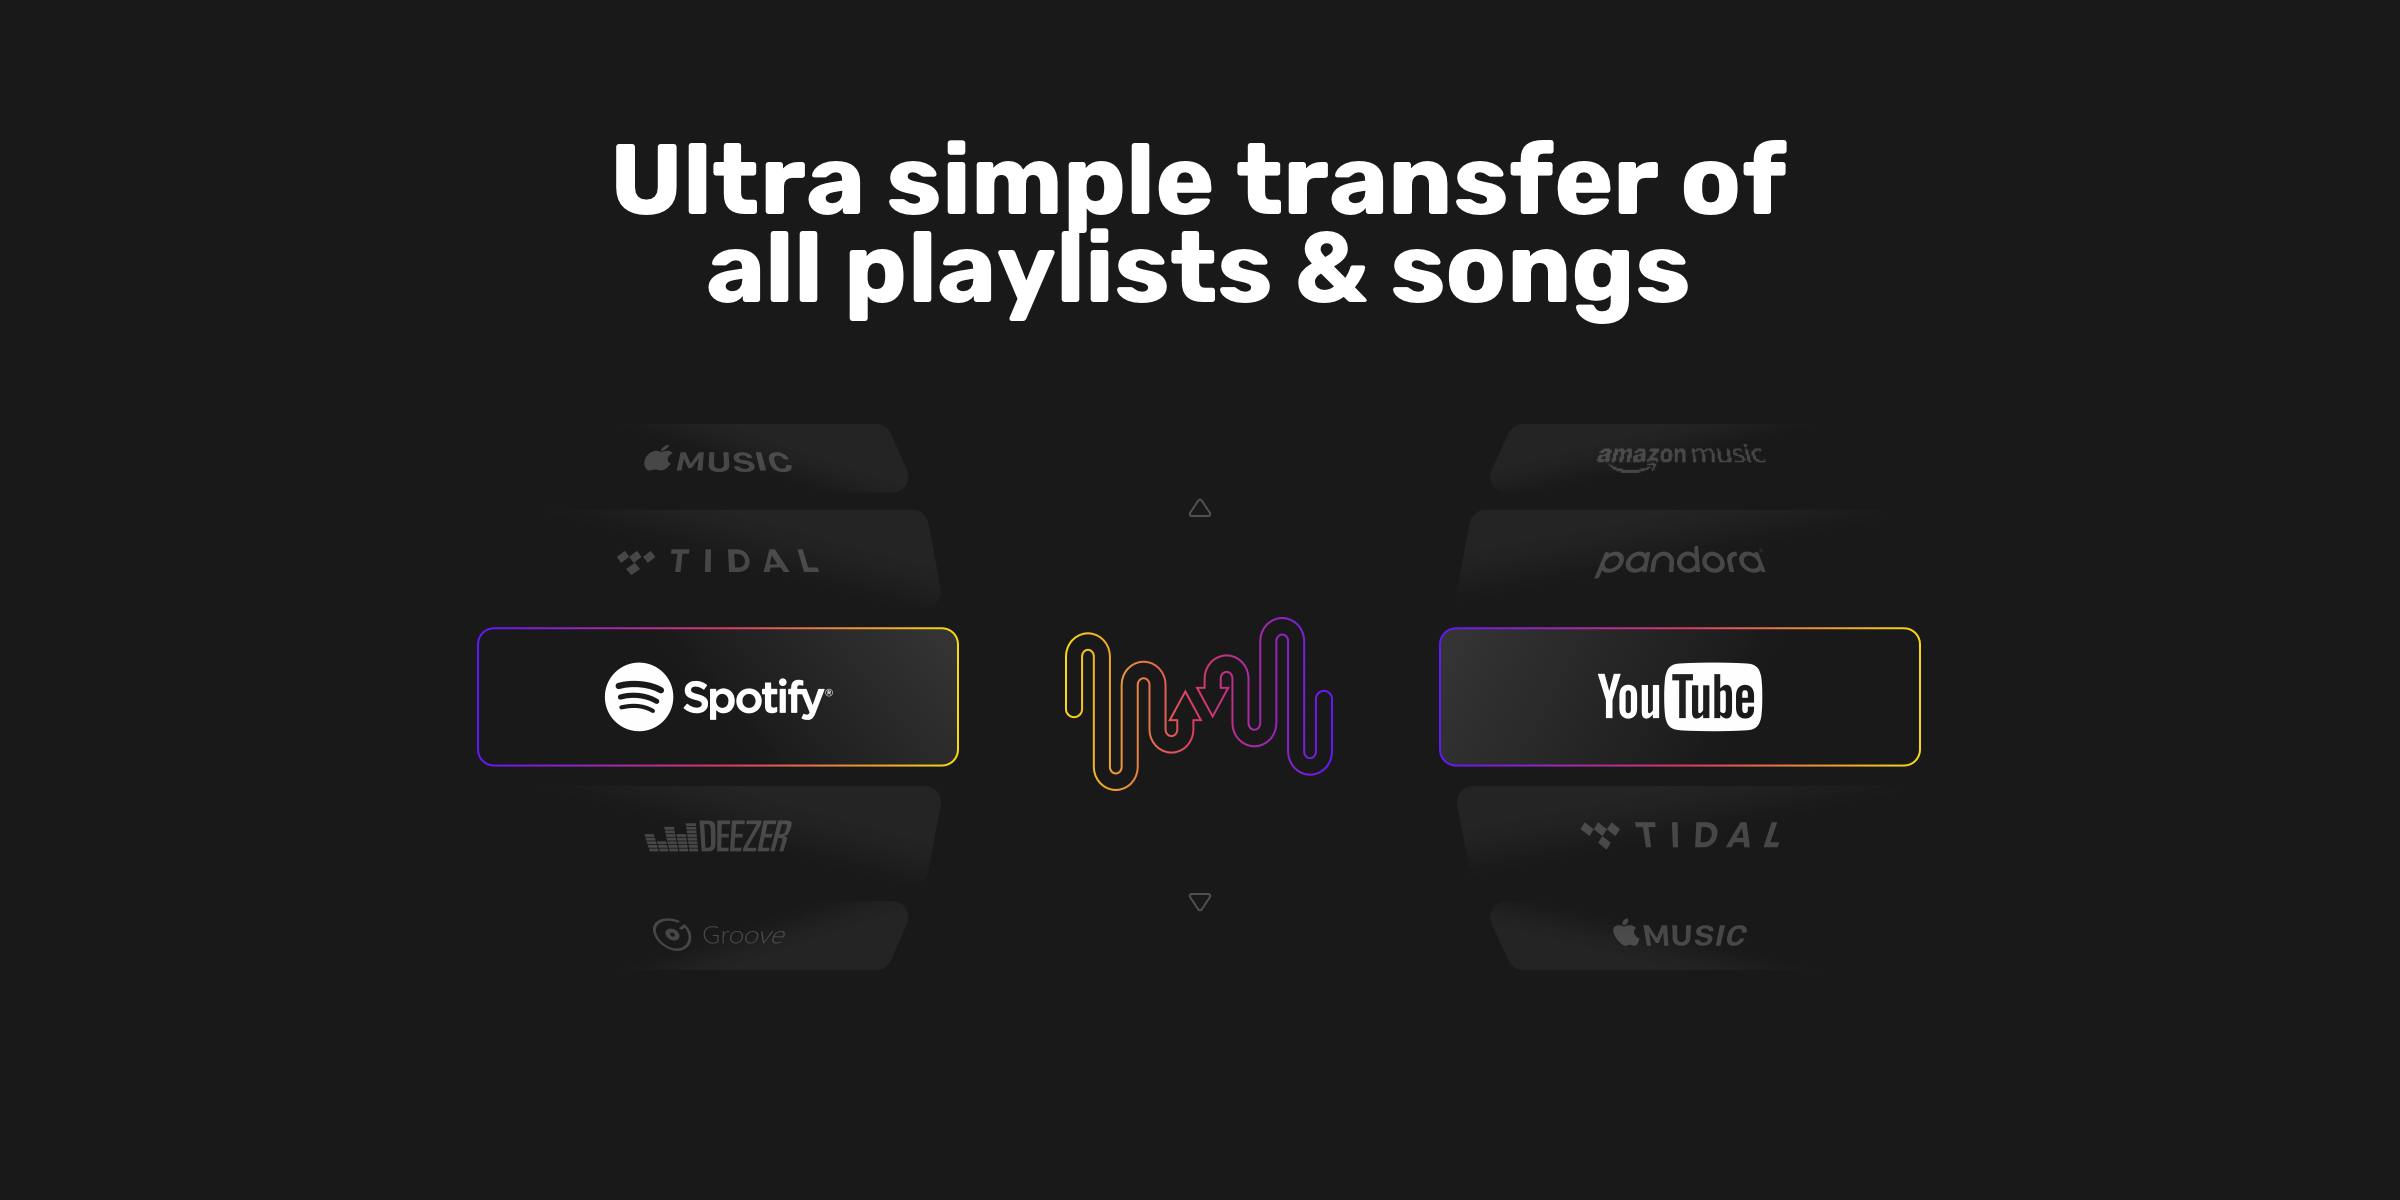 Stream PALUSA music  Listen to songs, albums, playlists for free